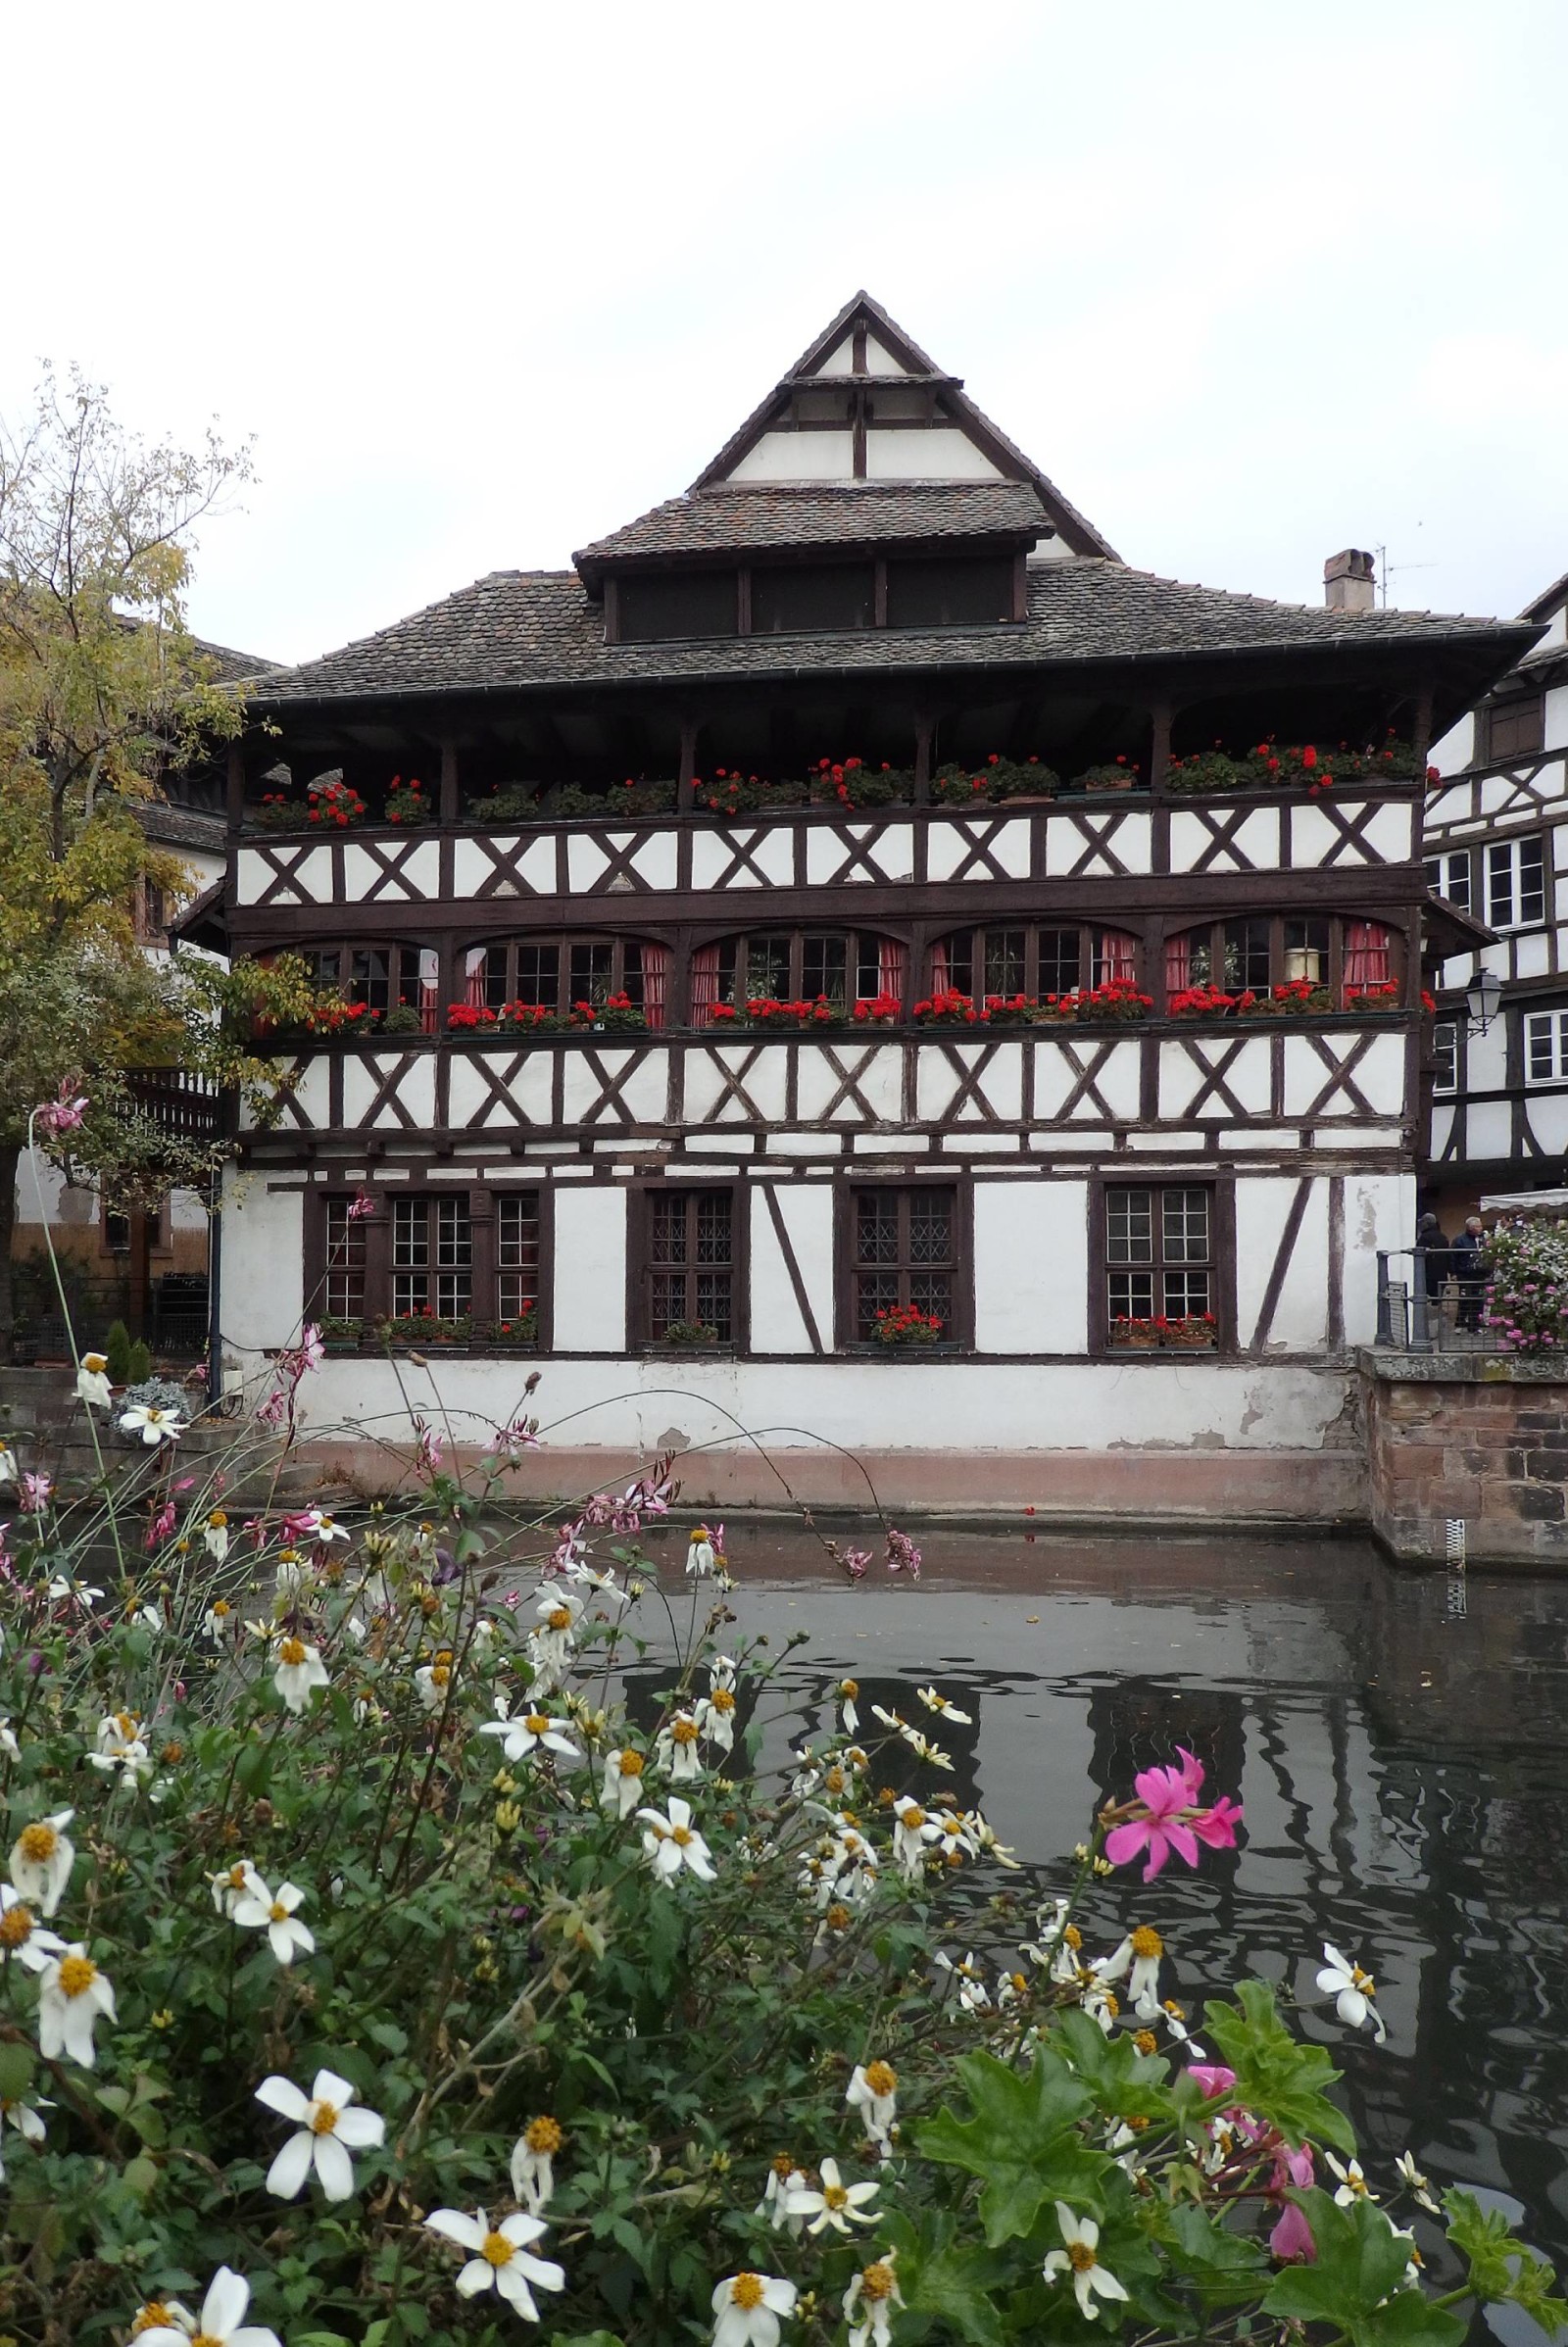 France Travel Inspirationvisiting Strasbourg, France on your next vacation then you've picked one of the prettiest cities in France to visit! Here's my Guide of Things to Do and See in Strasbourg France...it's a perfect city to visit for 2-3 days plus there are some handy gluten free food traveling tips in there as well. 